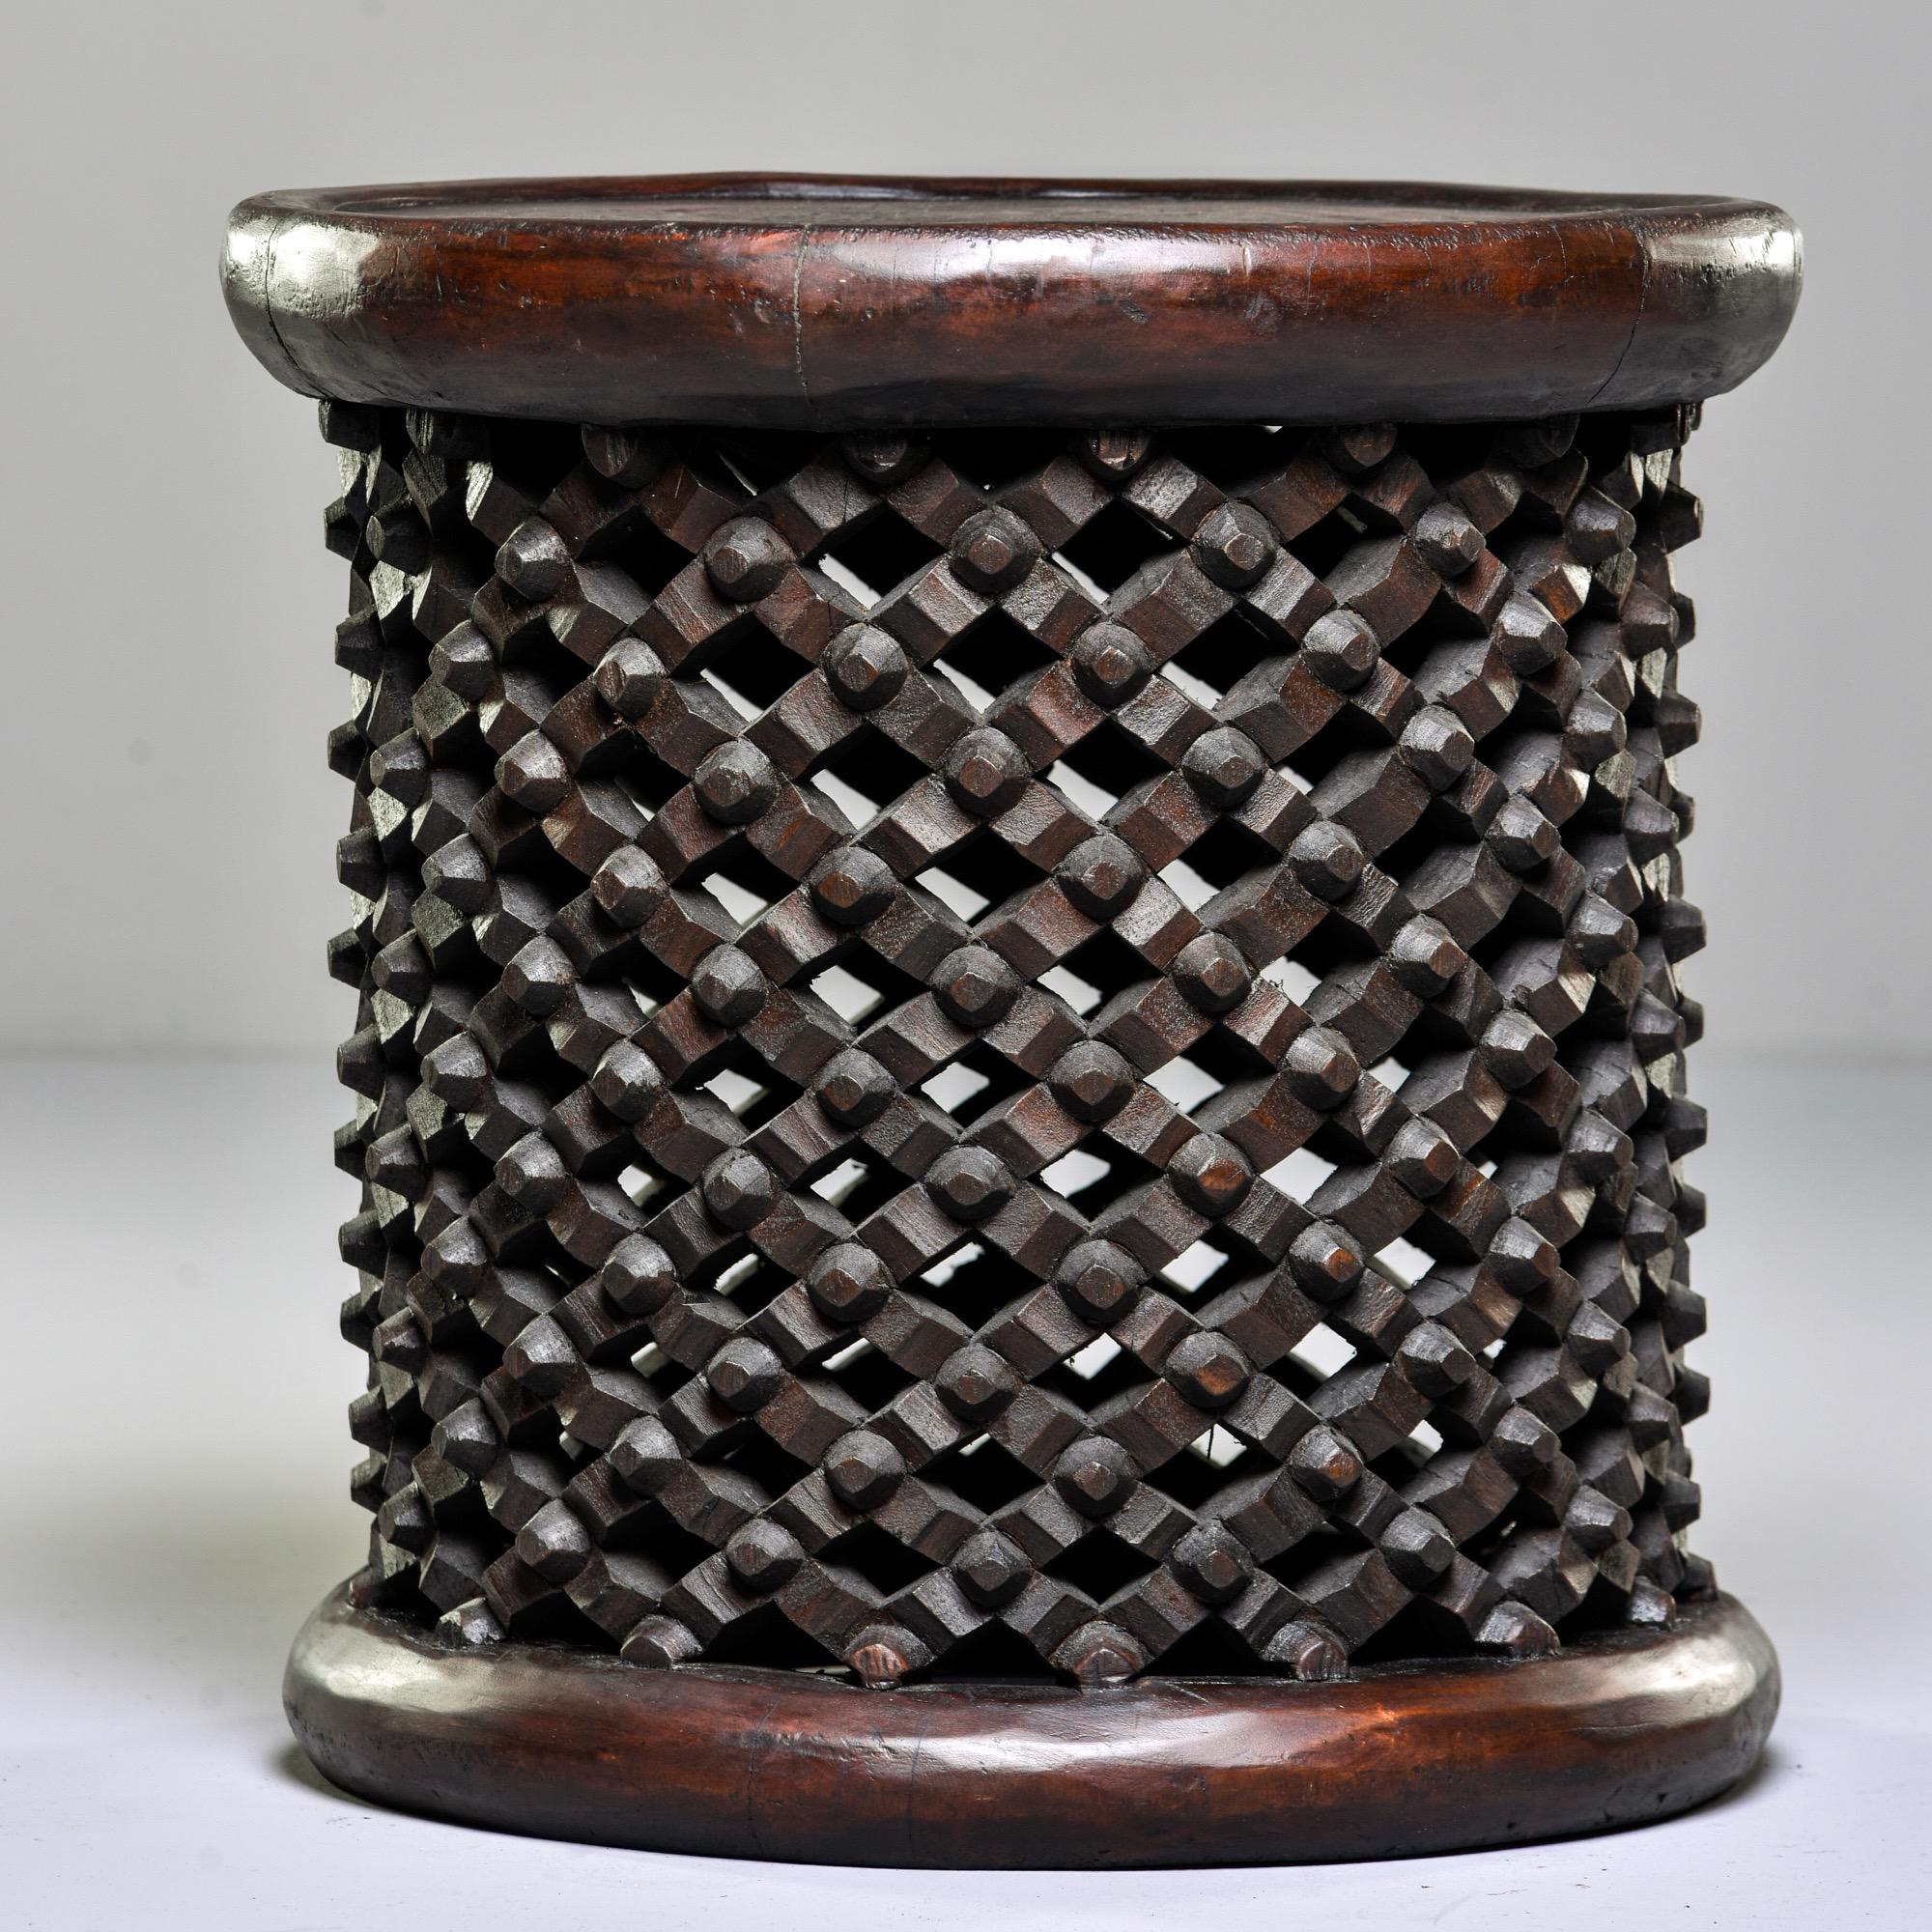 Round dark wood stool or side table, circa 1980s. Hand-carved by a tribal artist in Cameroon, this style is known as a spider stool because of its knobby web-like base. The Bamileke people see spiders as a link between the living and the dead and